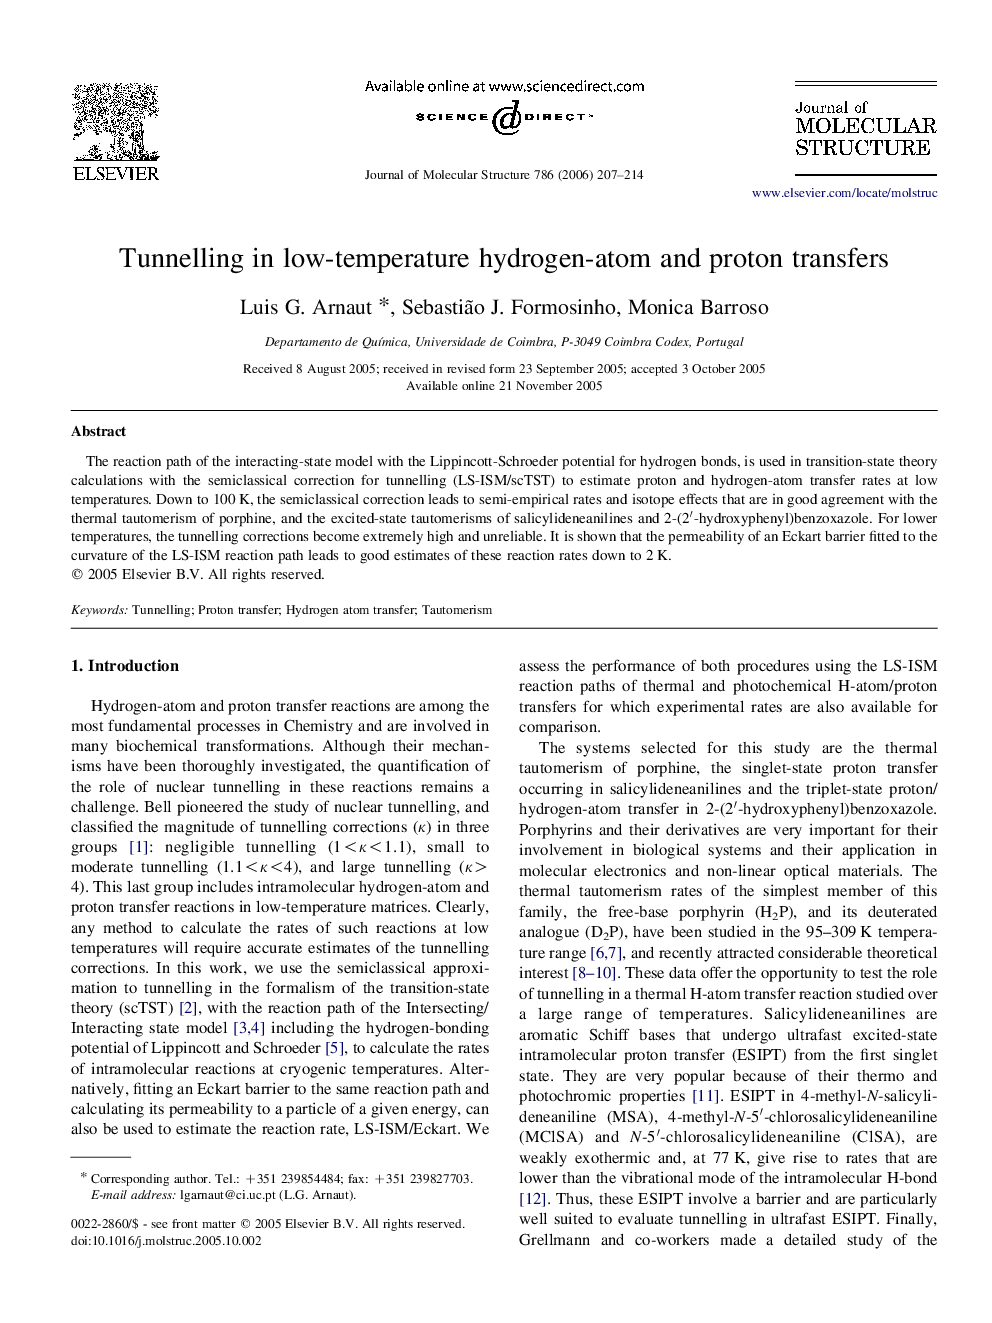 Tunnelling in low-temperature hydrogen-atom and proton transfers